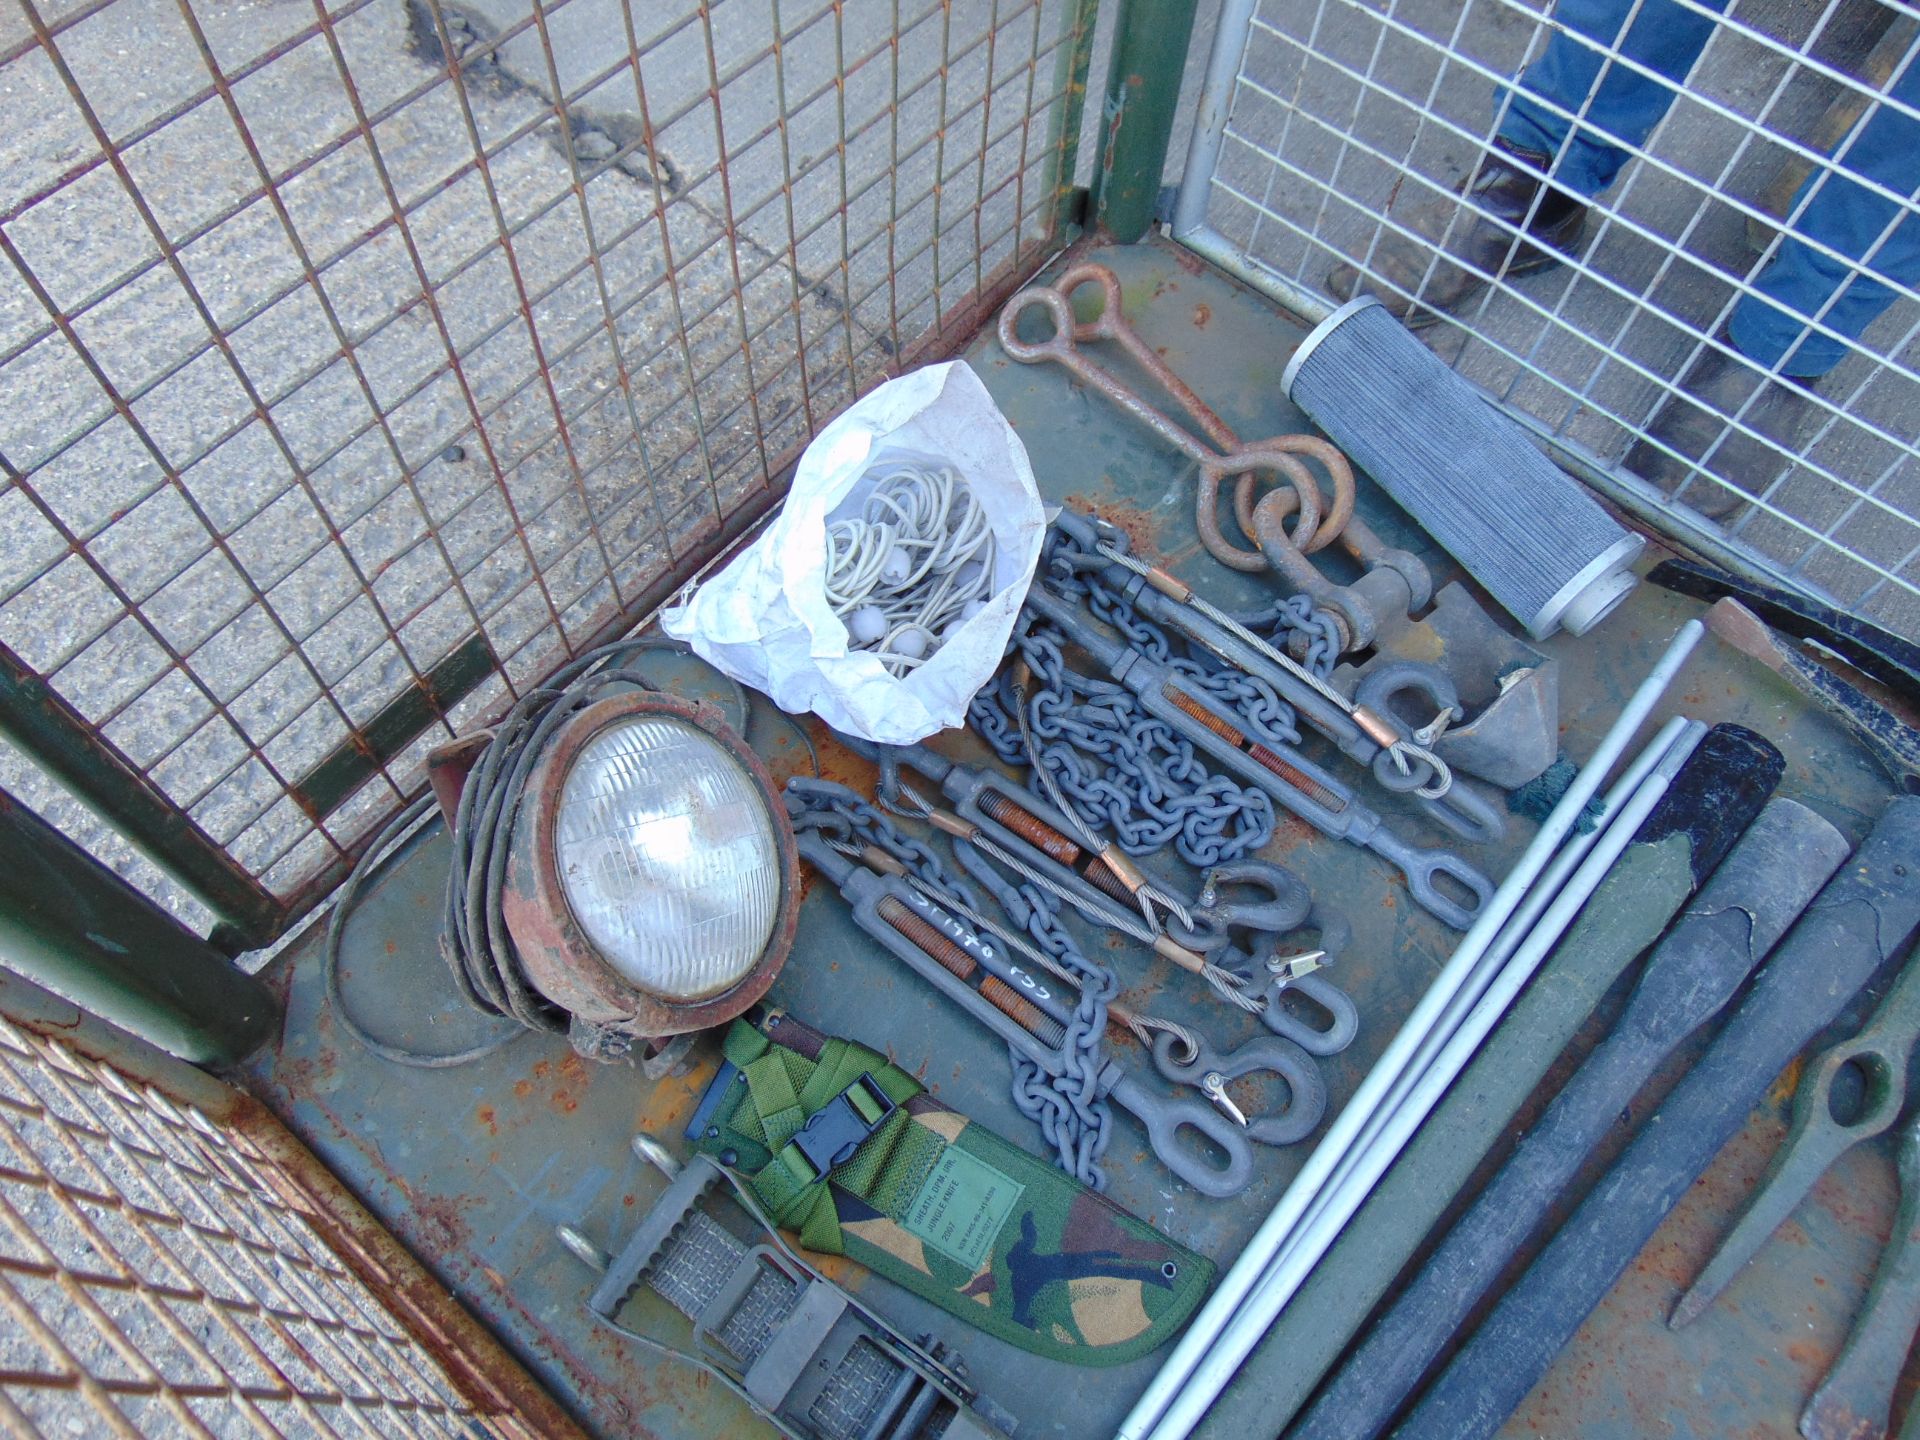 1 x Stillage Tools, Load Binders, Search Light Etc - Image 4 of 5